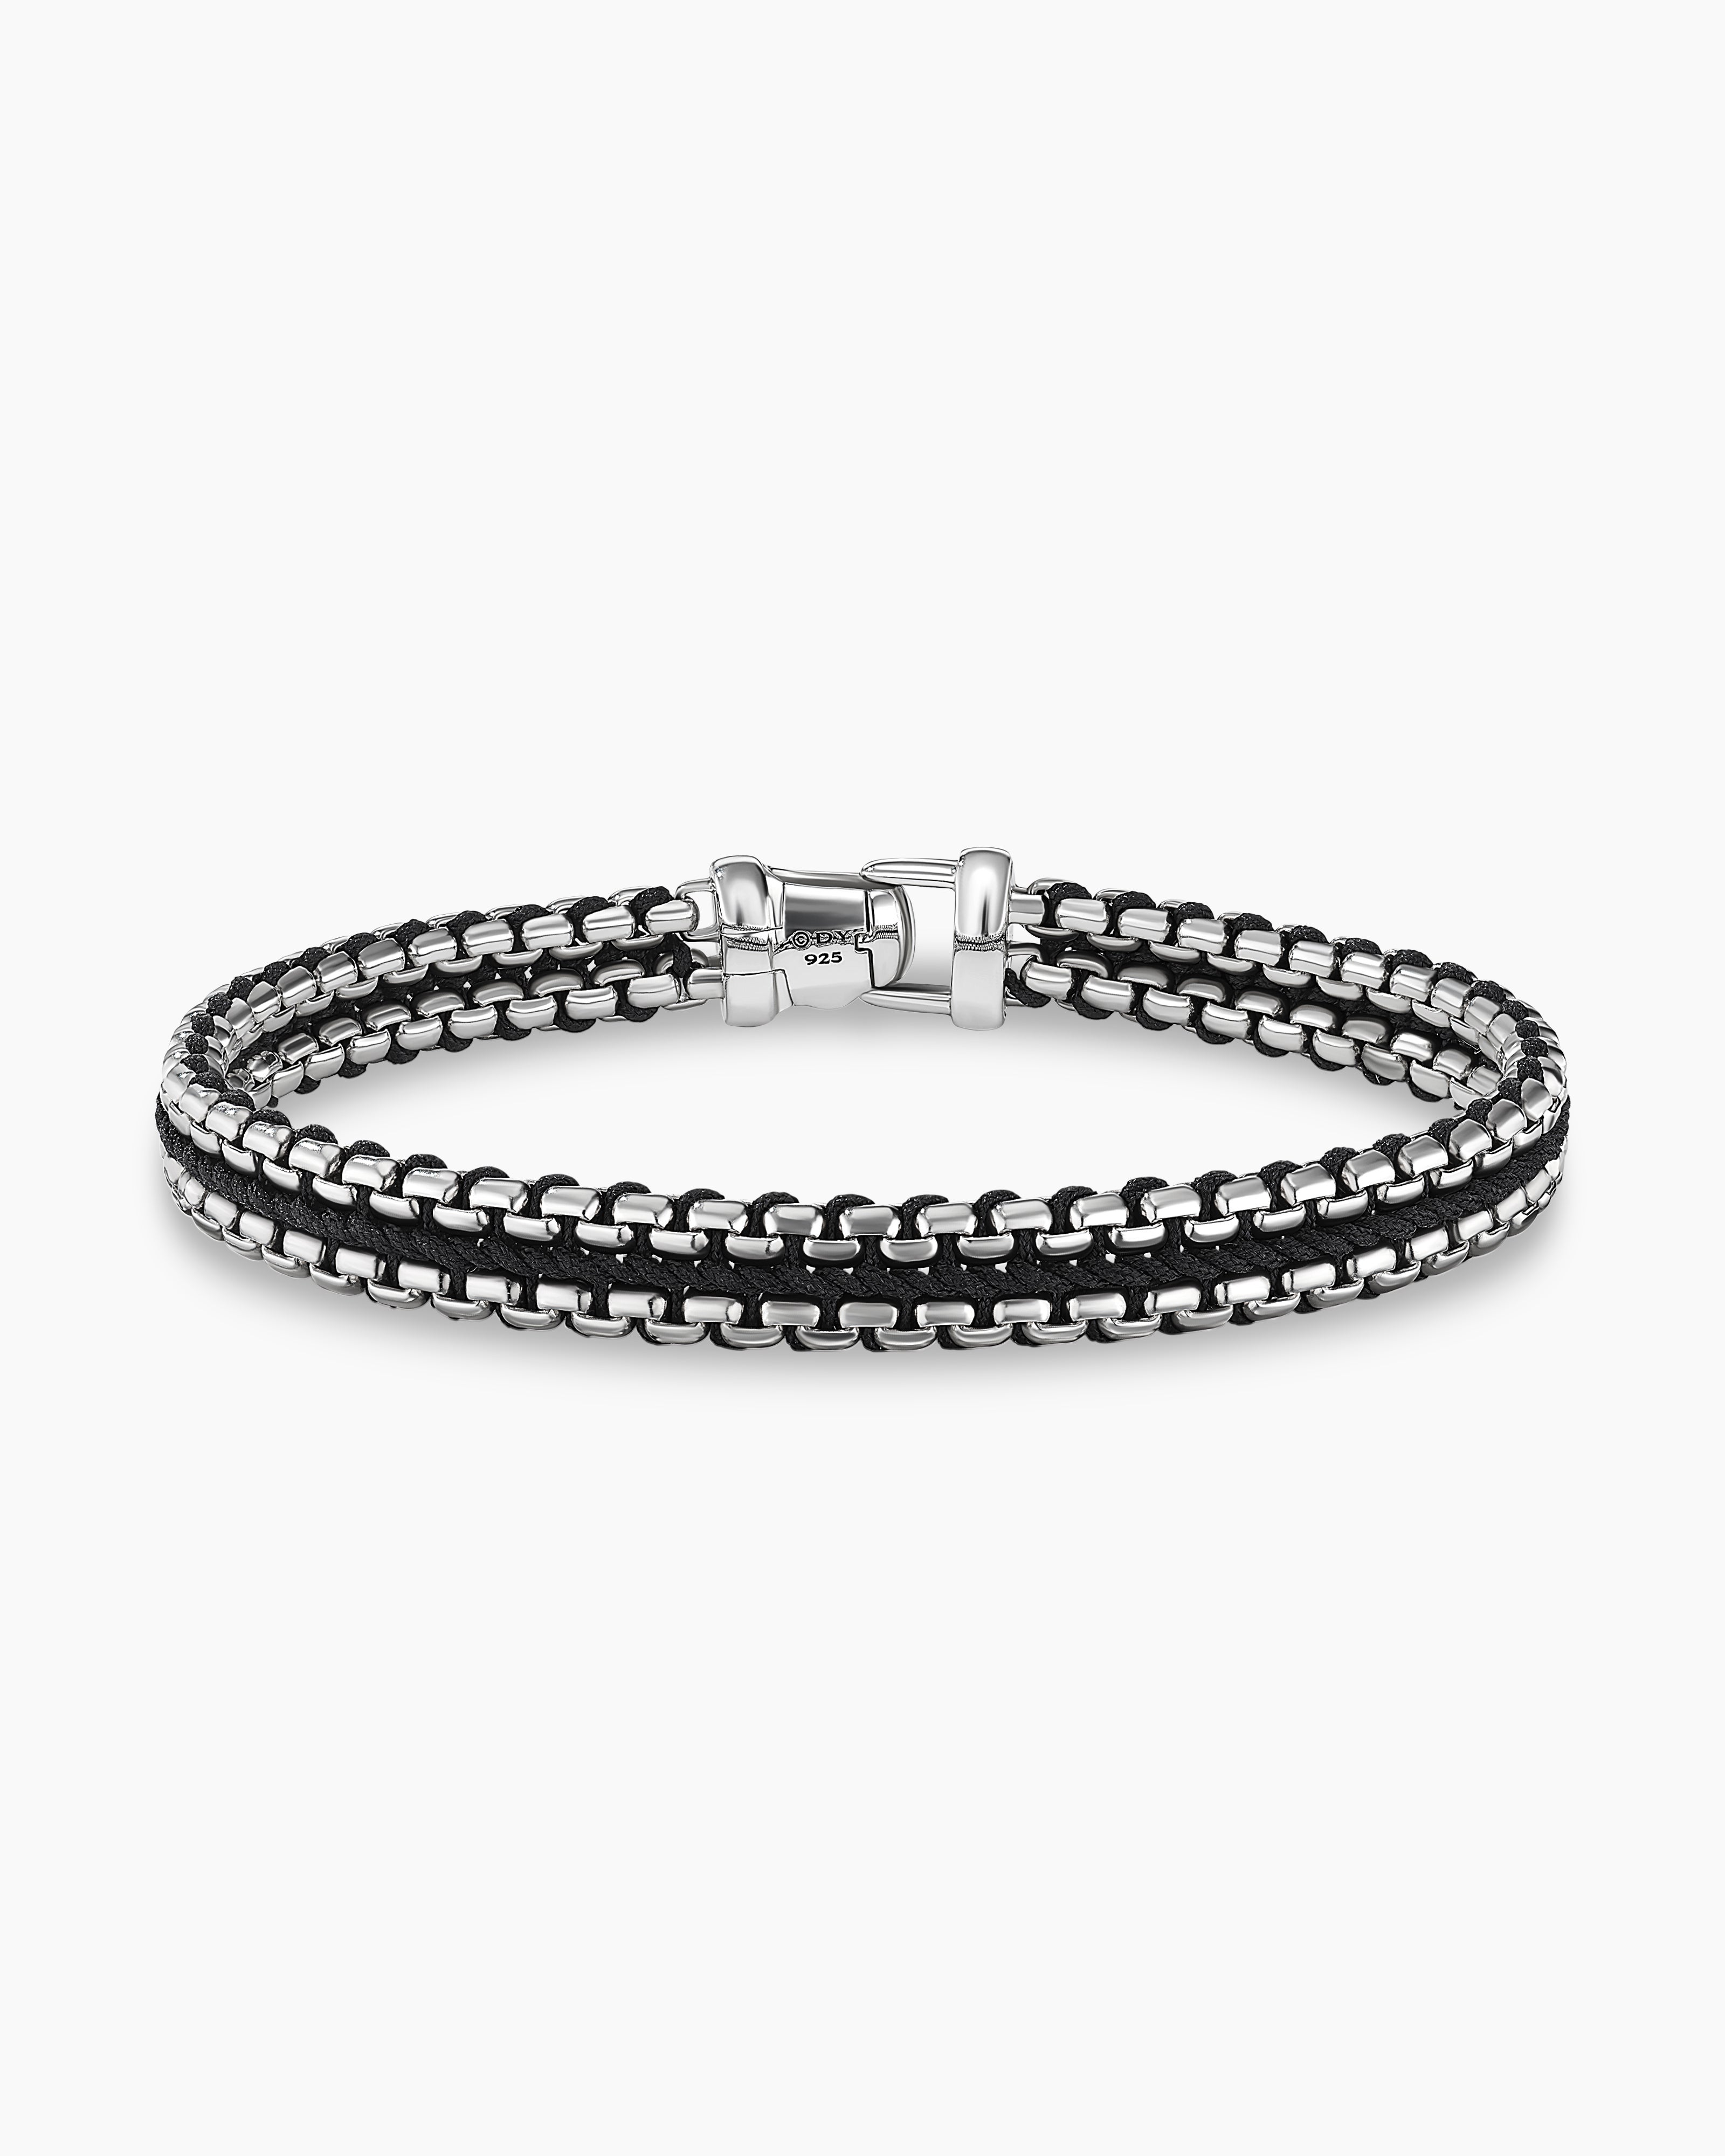 Woven Box Chain Bracelet in Sterling Silver with Black Nylon, 10mm